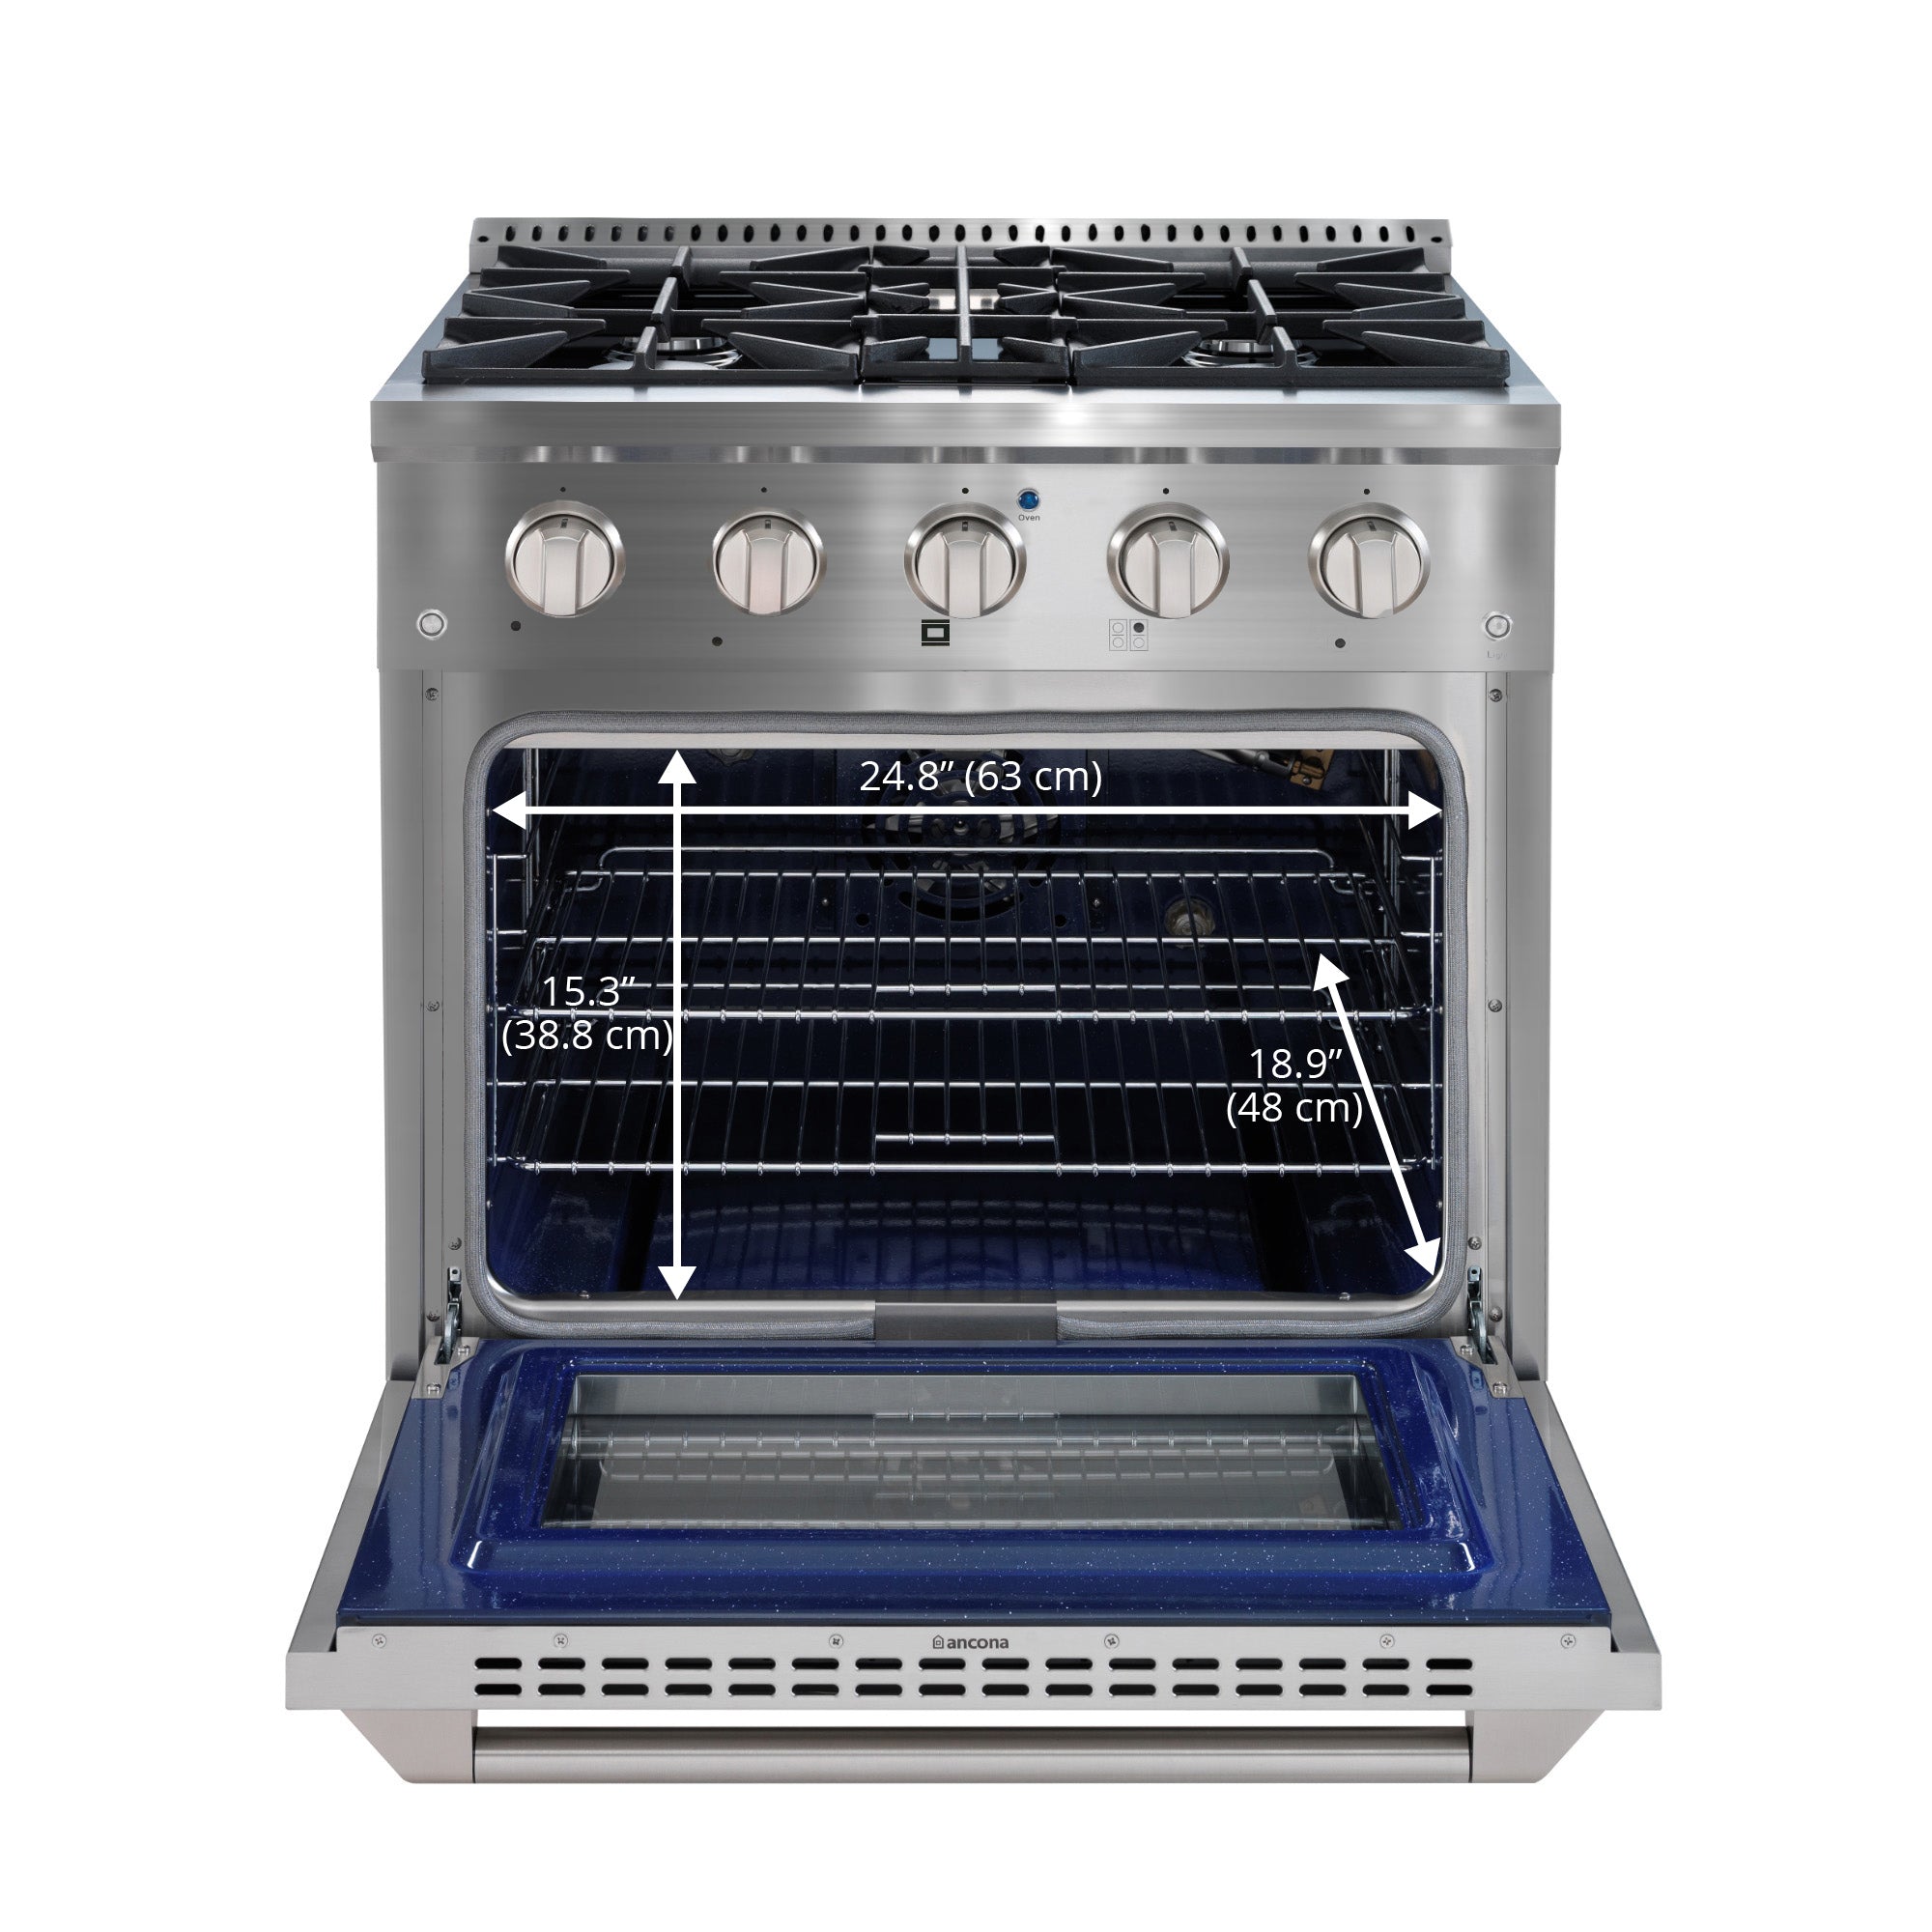 Ancona 30” 4.2 cu. ft. Gas Range with 4 Burners and Convection Oven in Stainless Steel